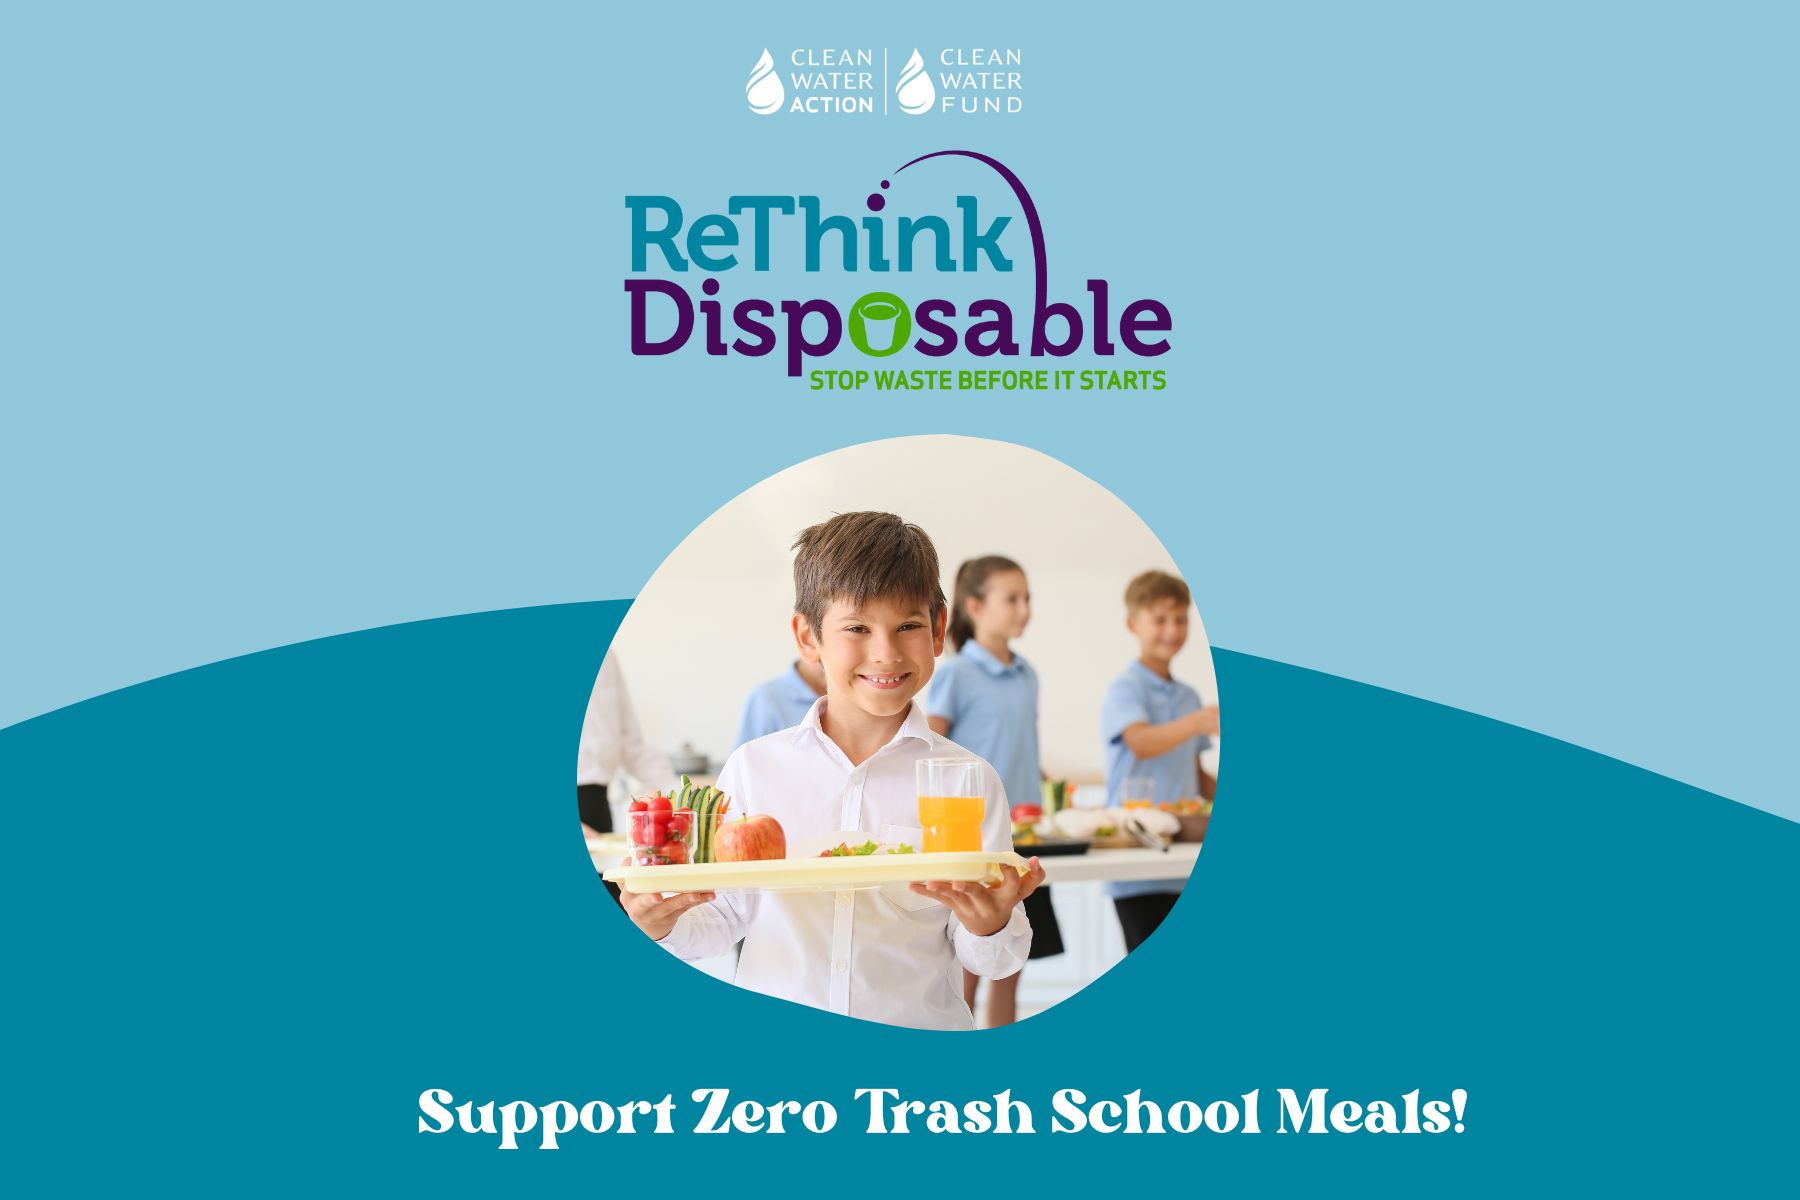 Image of a graphic design with kid holding plate of reusables with ReThink Disposable logo